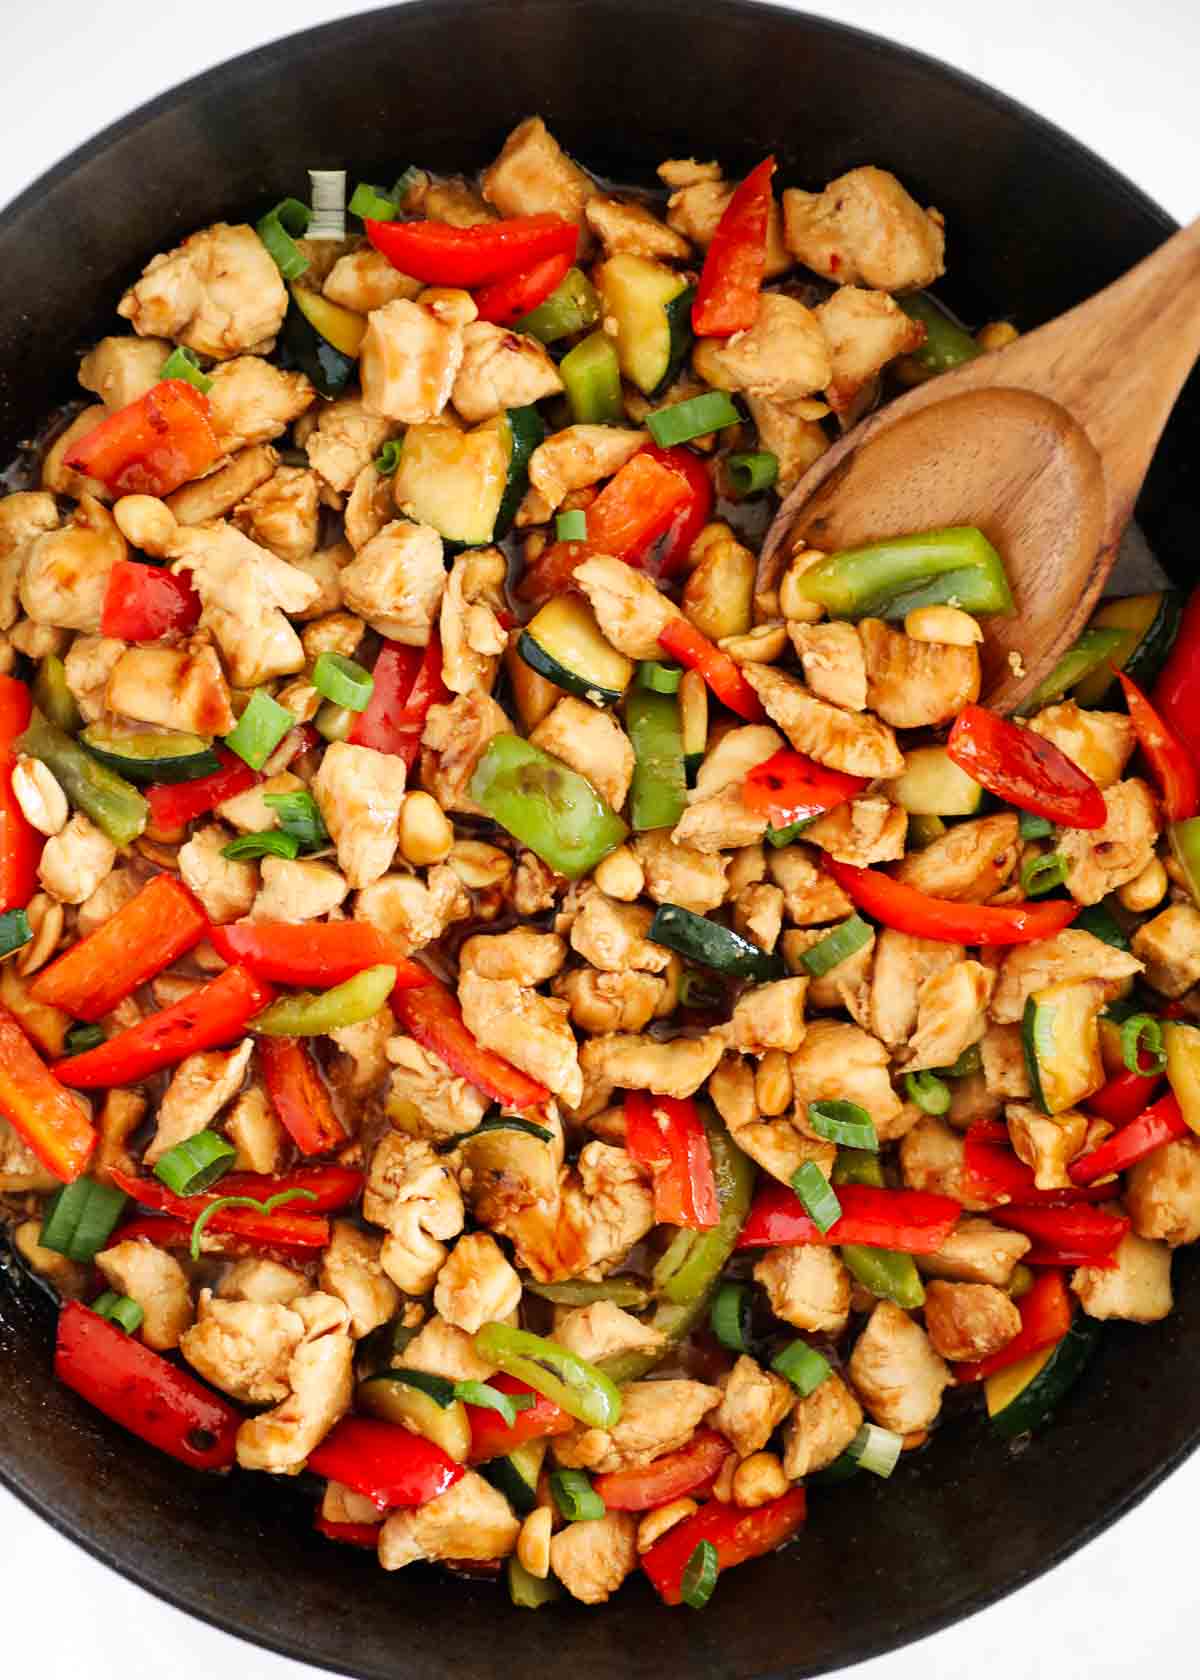 Kung pao chicken in skillet.